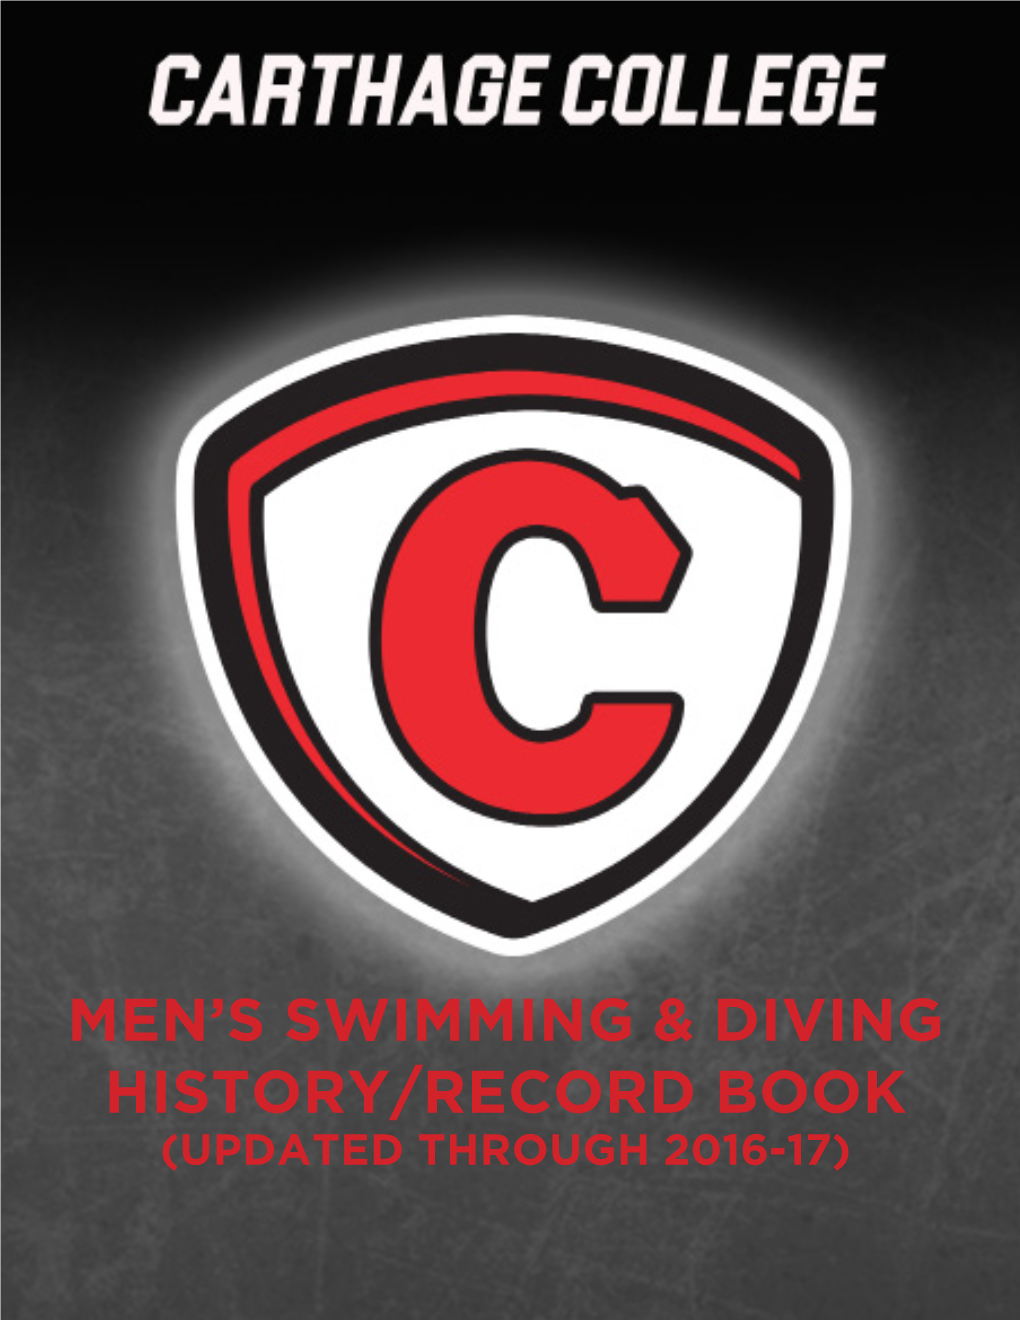 Men's Swimming & Diving History/Record Book